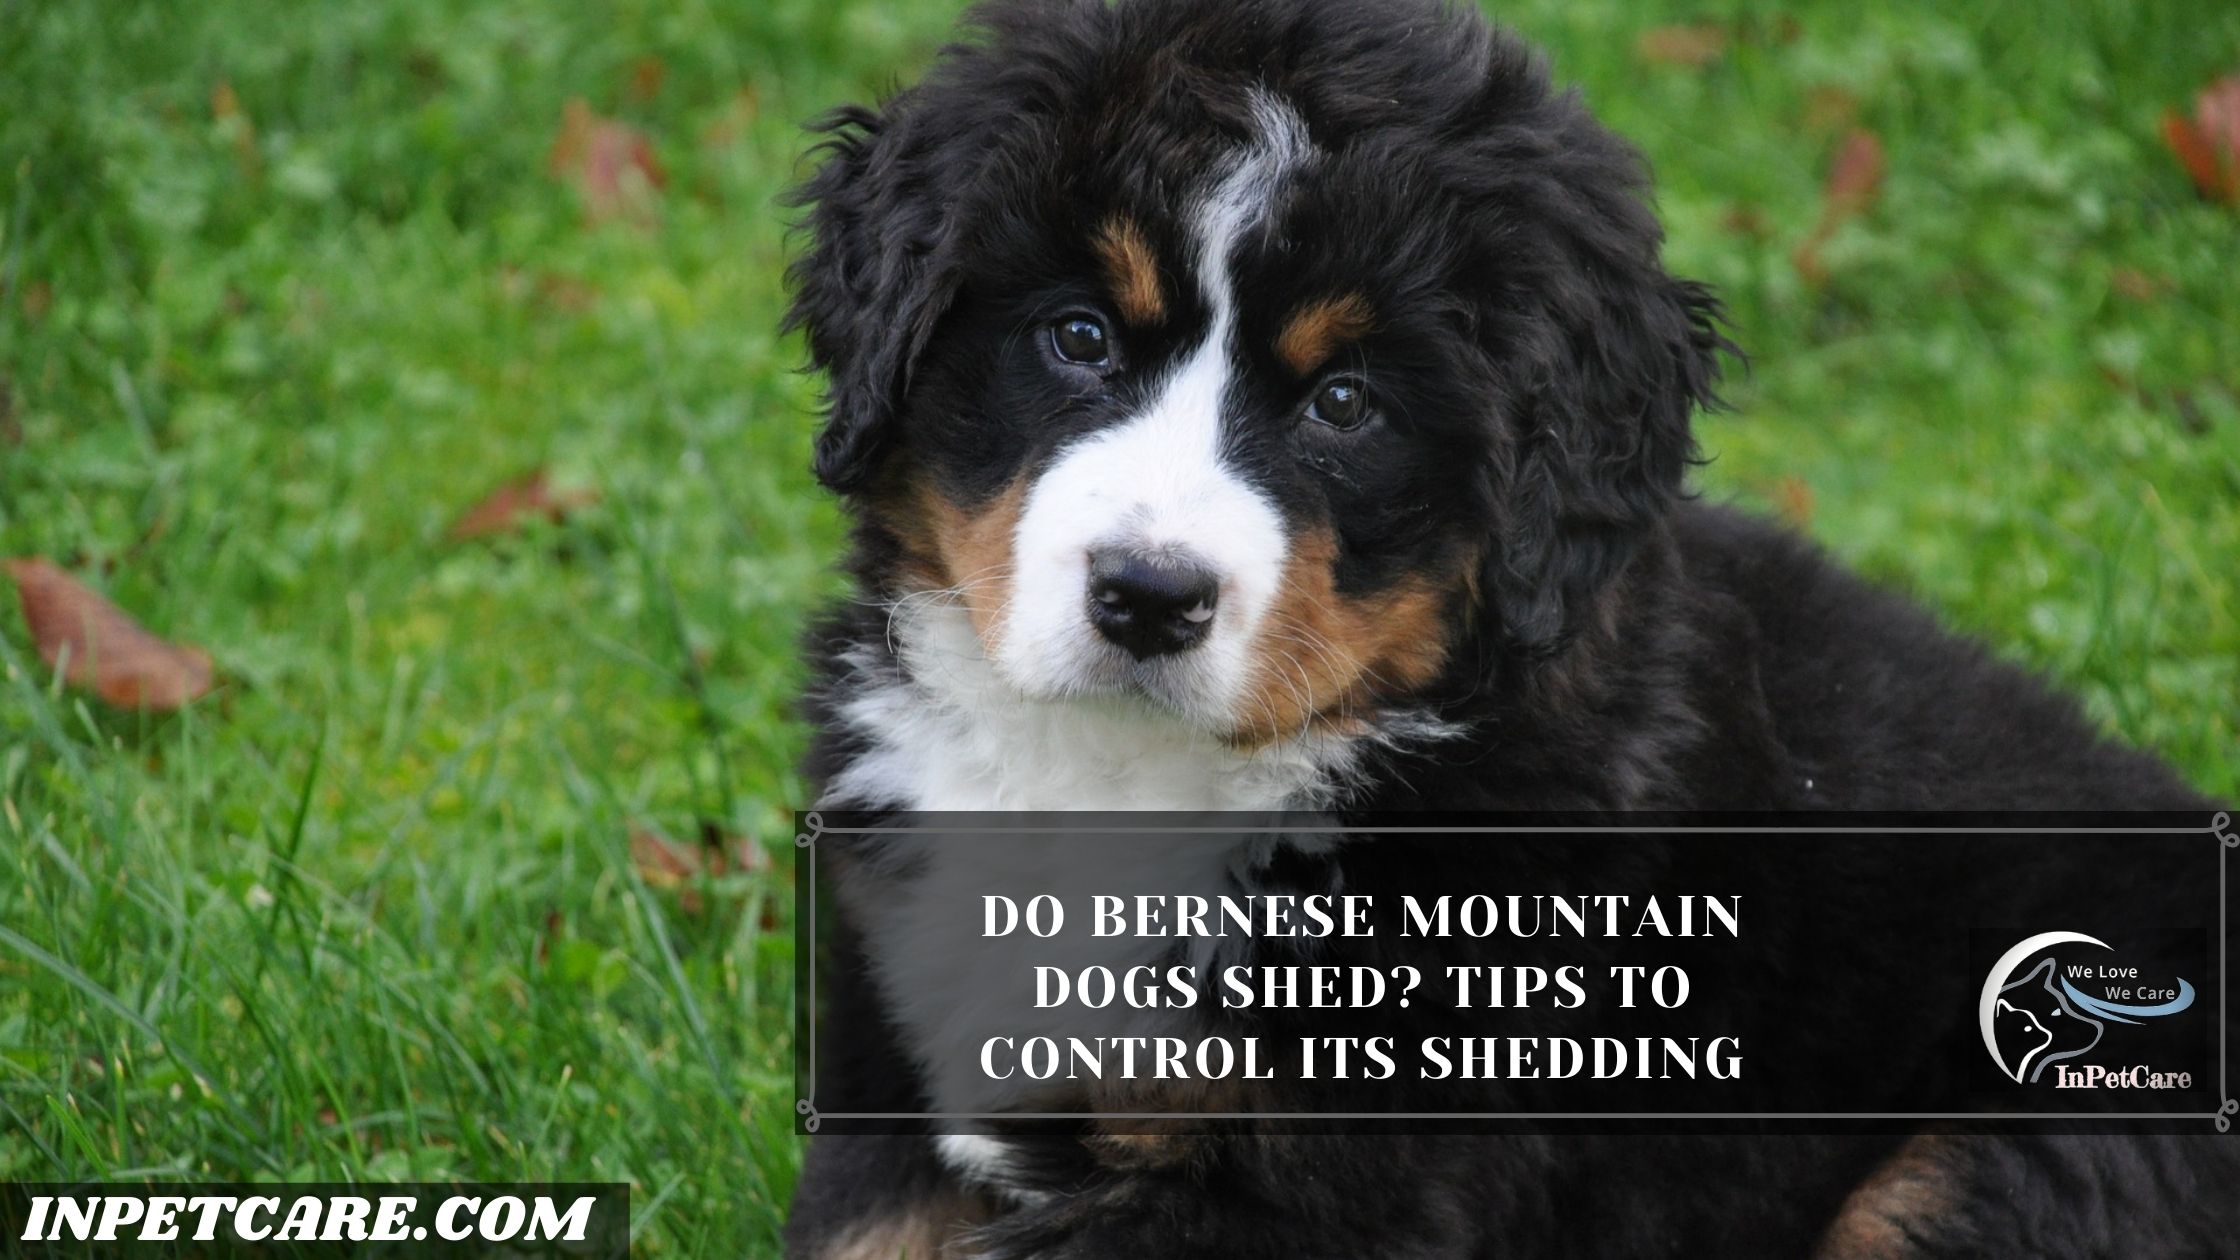 Do Bernese Mountain Dogs Shed? Tips To Control Its Shedding